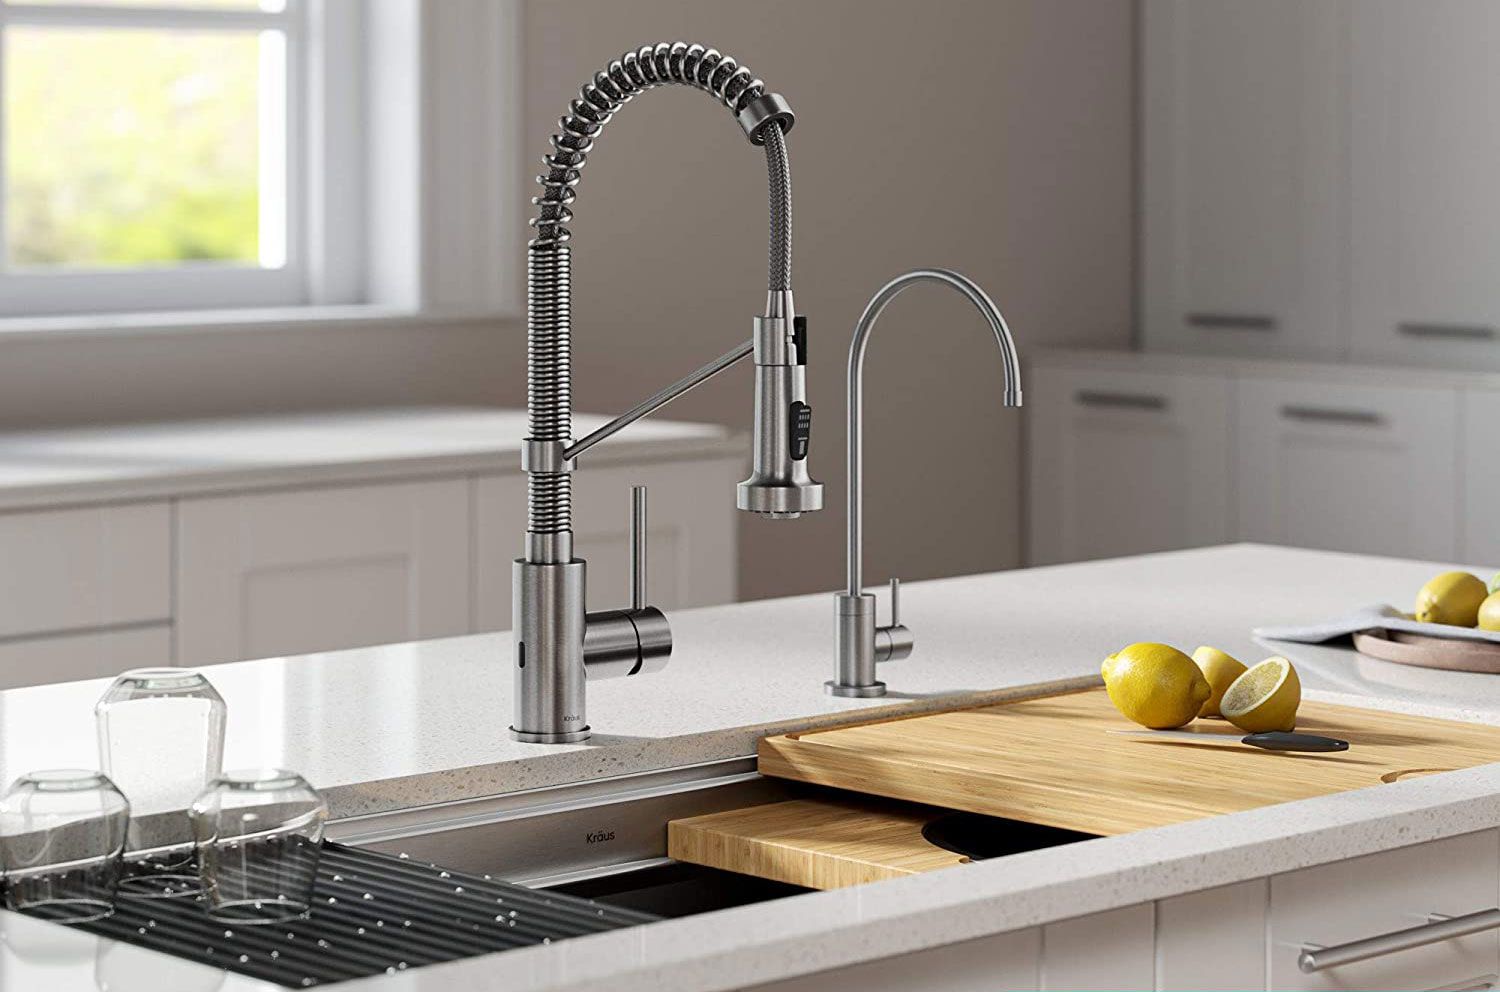 GIMILI Motion Sensor Activated Hands-Free Kitchen Sink Faucet with Deck Plate,Brushed Nickel